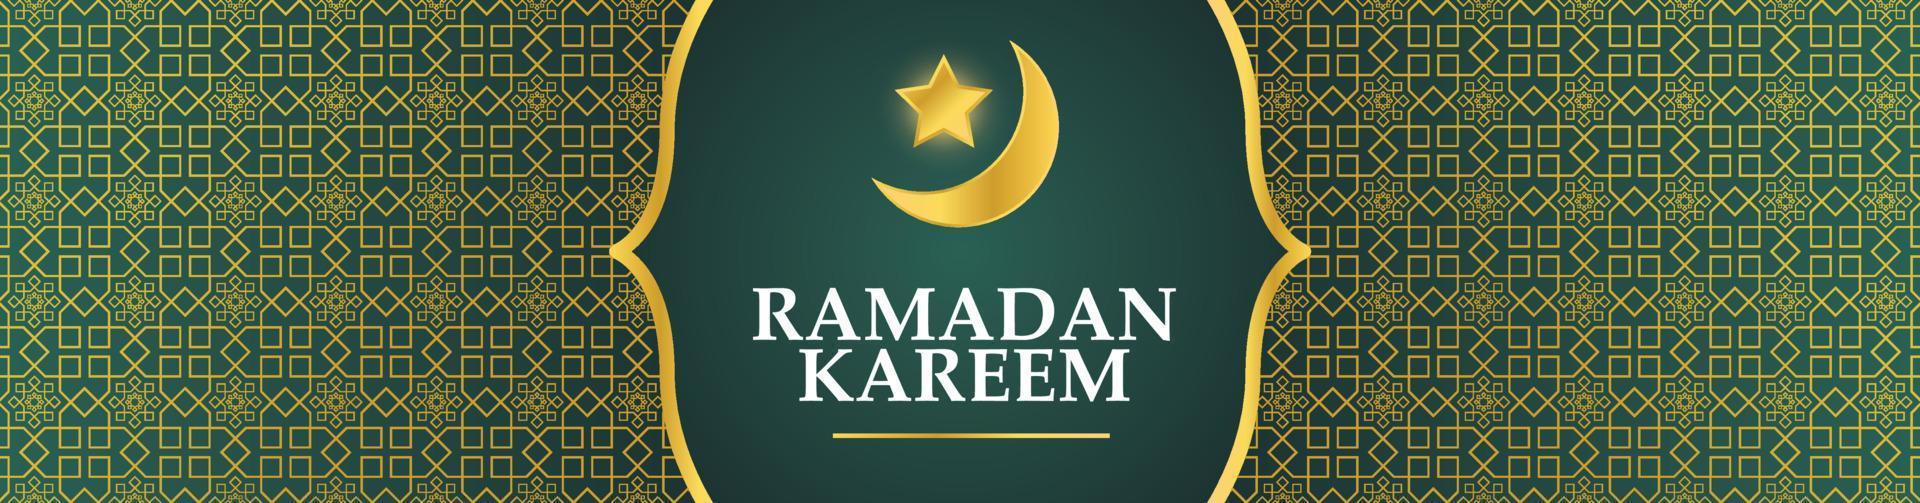 Ramadan Kareem Banner. Ramadan Islamic Holiday Graphic Template with Gold Ornament and Crescent vector